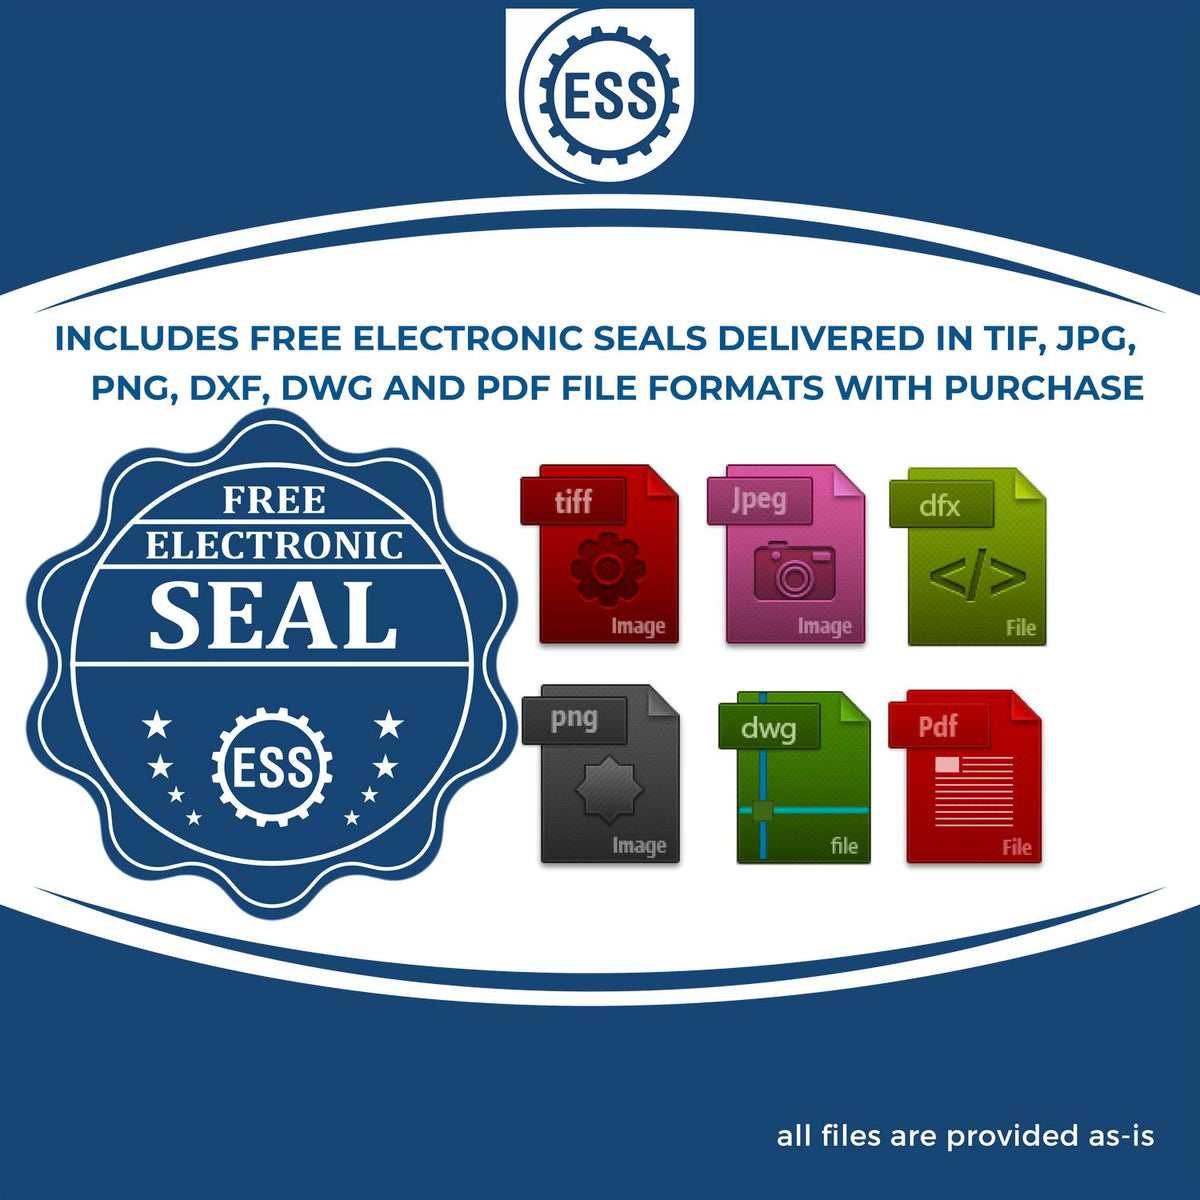 An infographic for the free electronic seal for the State of Connecticut Extended Long Reach Engineer Seal illustrating the different file type icons such as DXF, DWG, TIF, JPG and PNG.